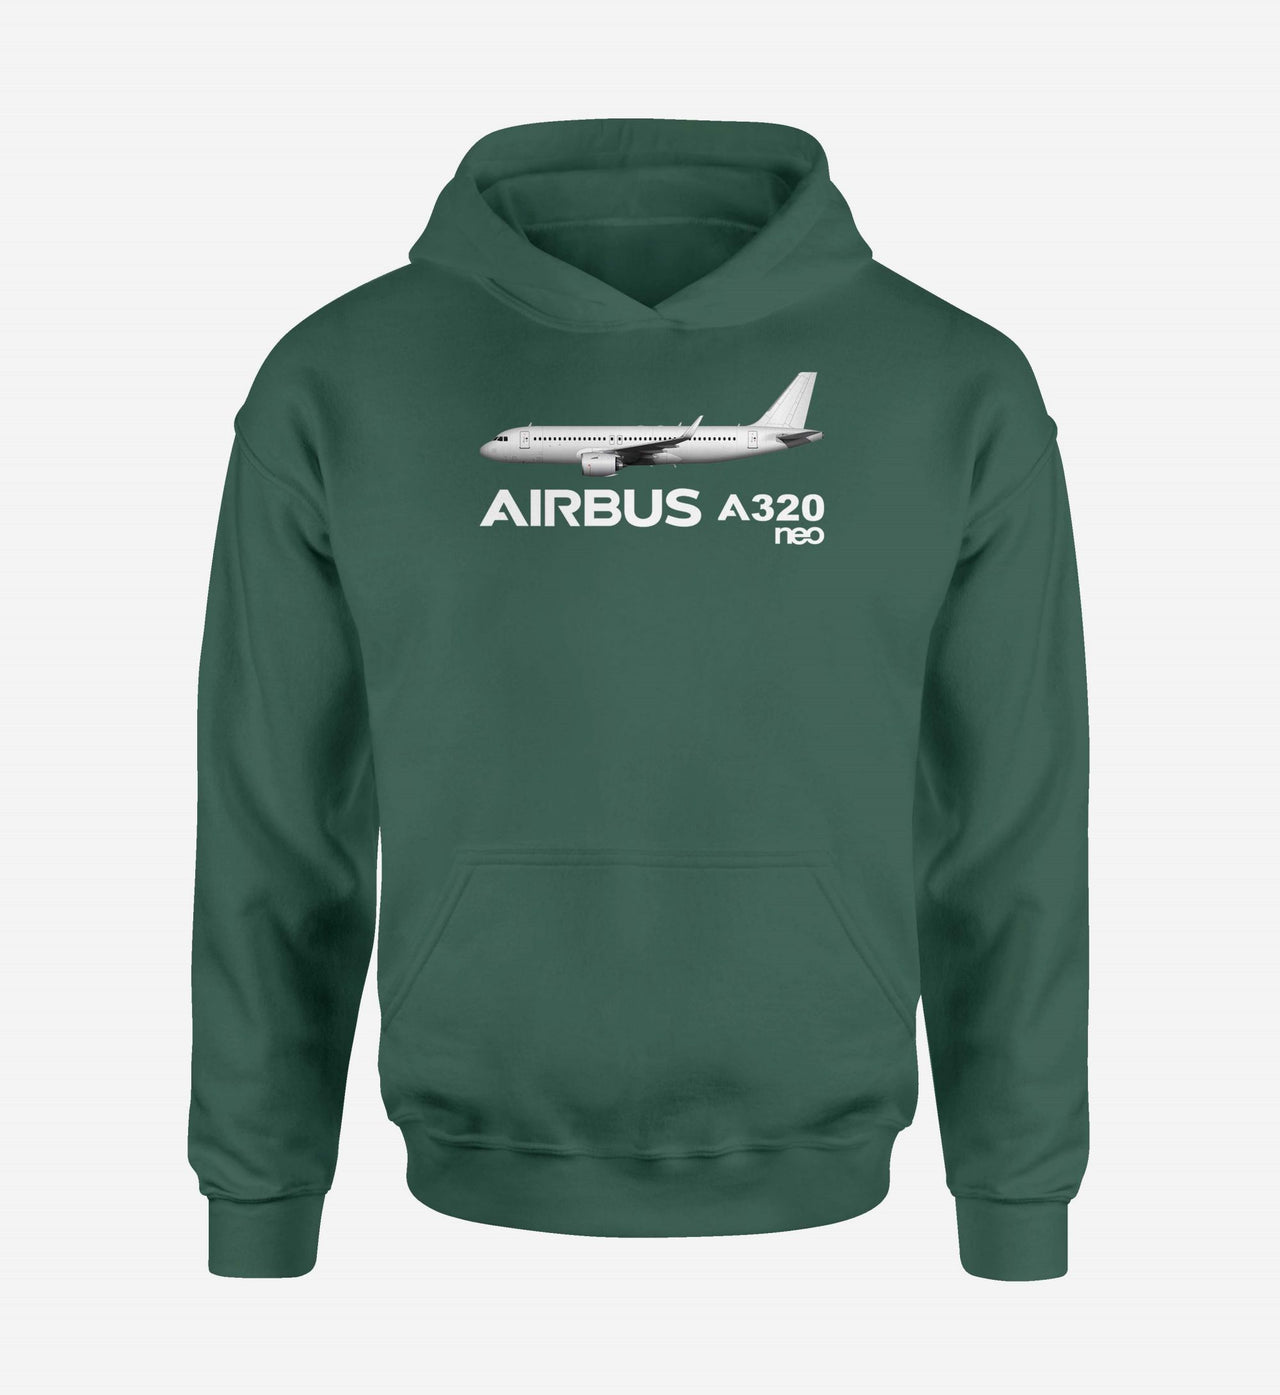 The Airbus A320Neo Designed Hoodies